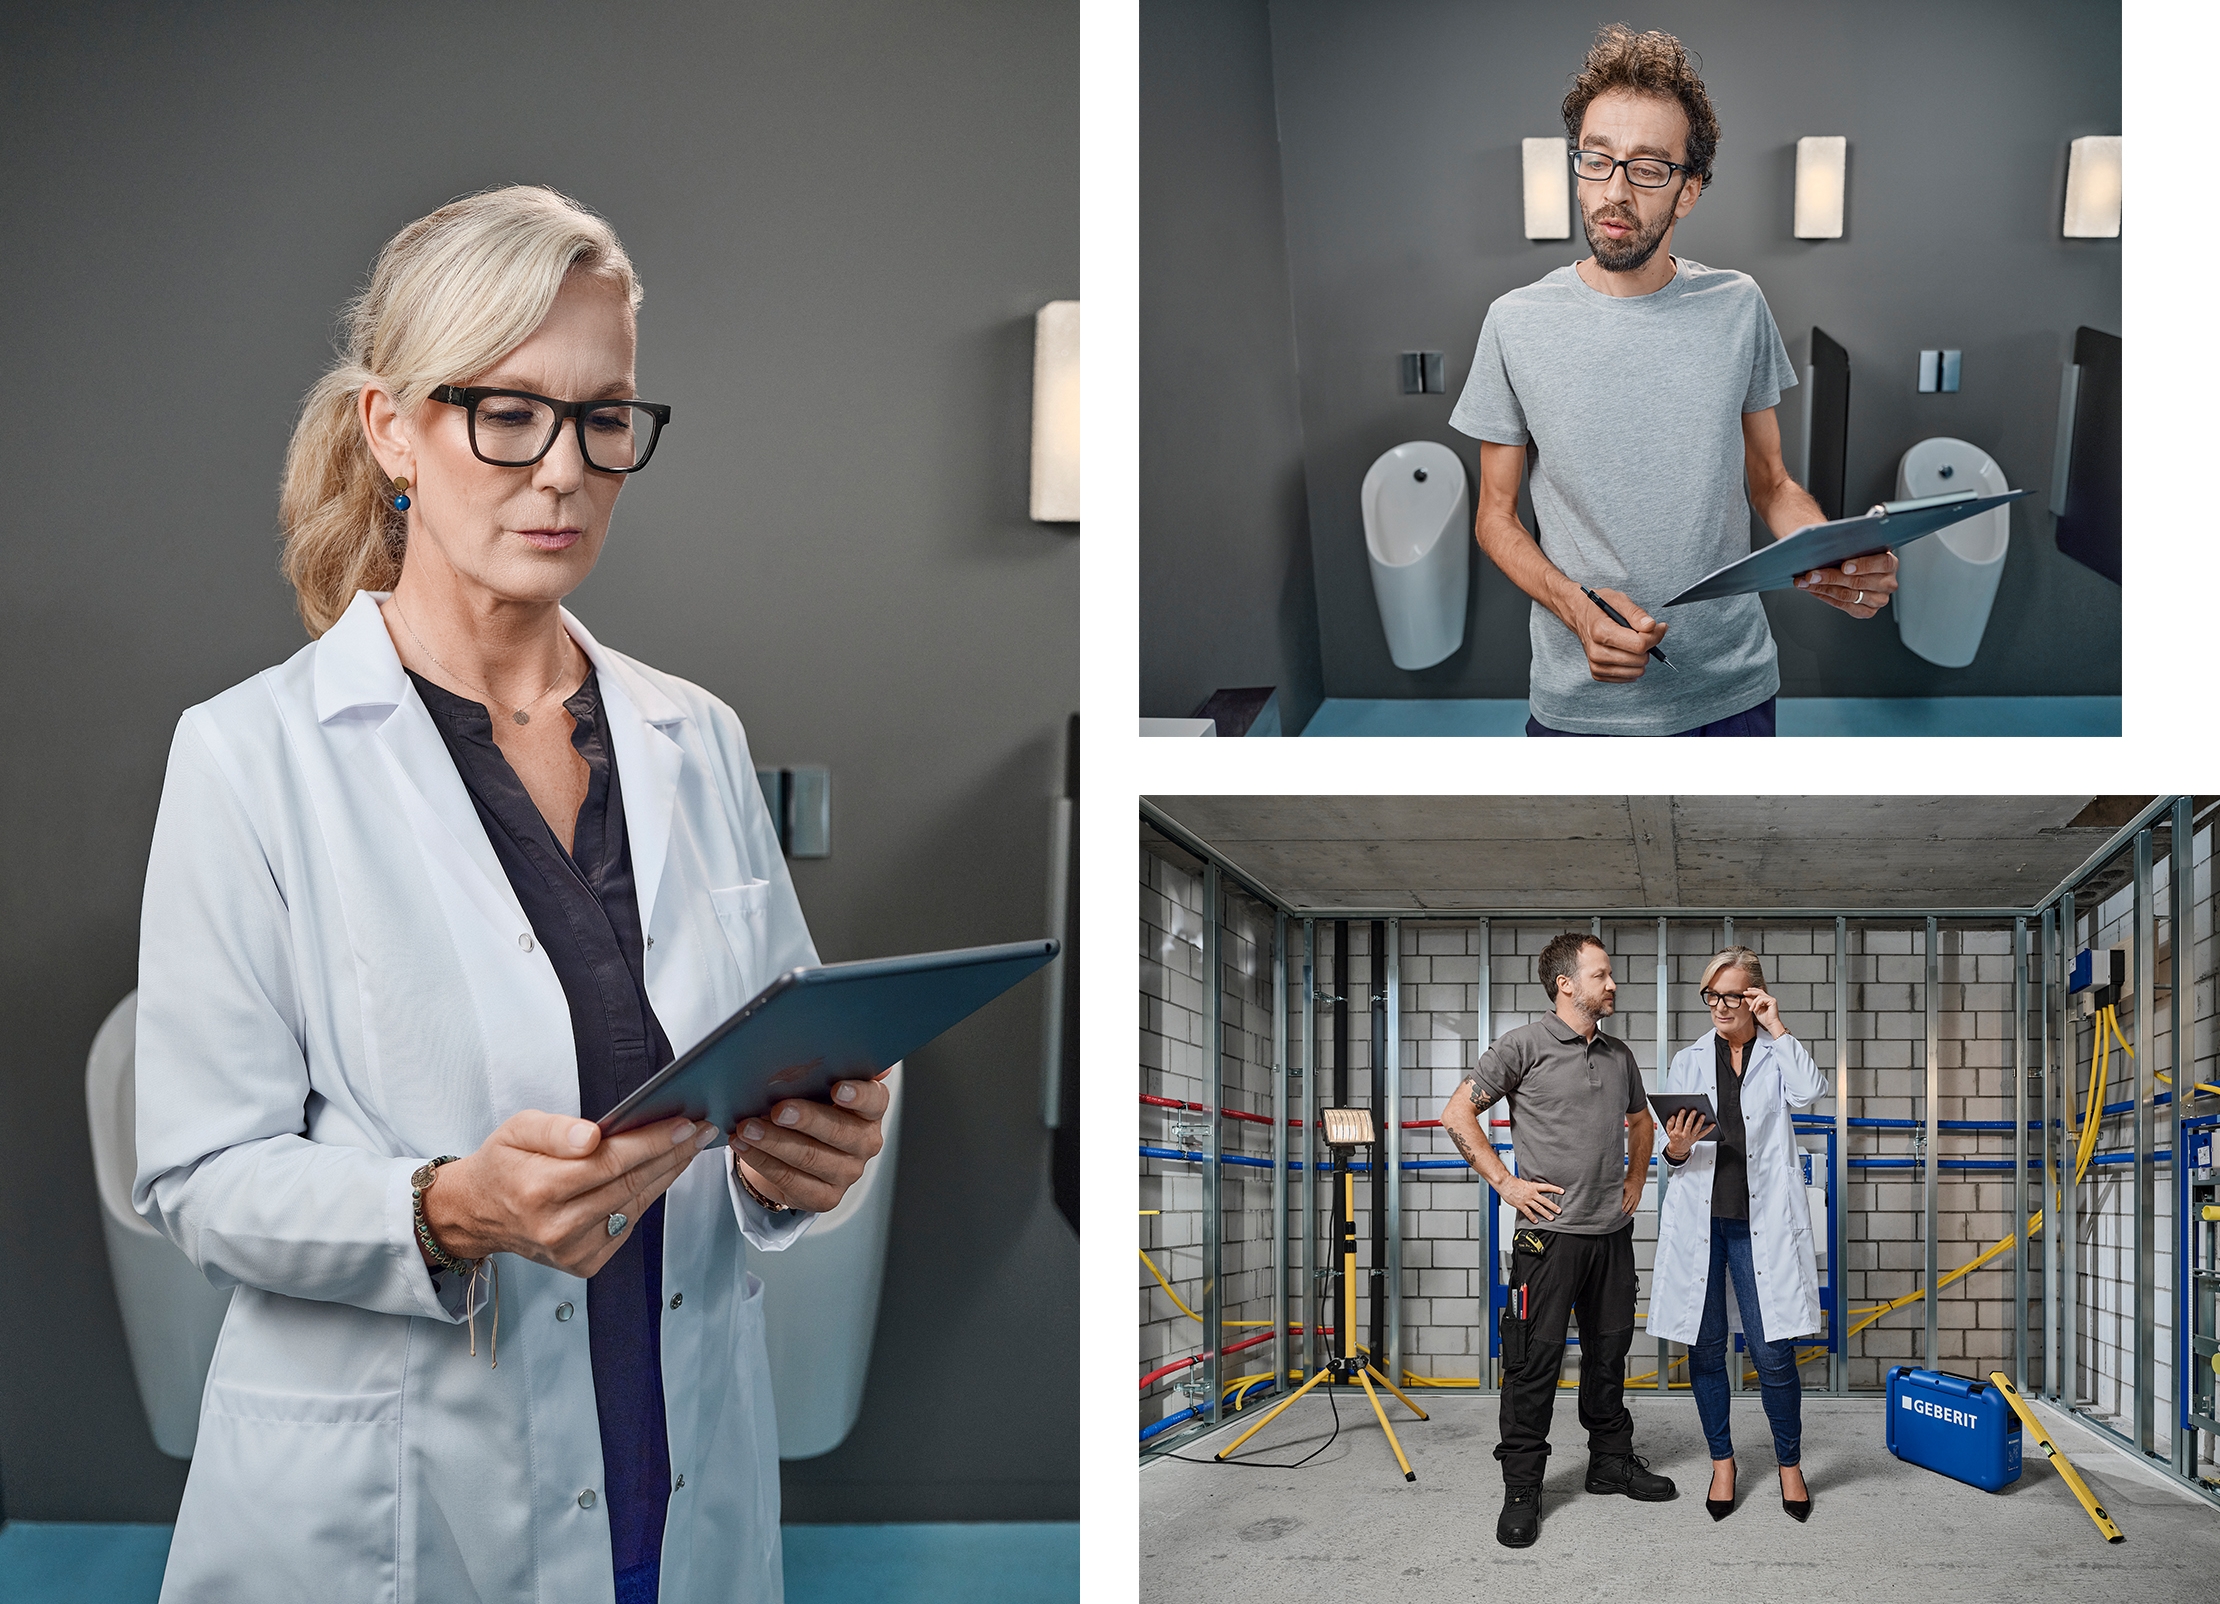 collage of a woman in a lab coat, a man holding a tablet in front of urinals and another man and the lab woman on a construction site